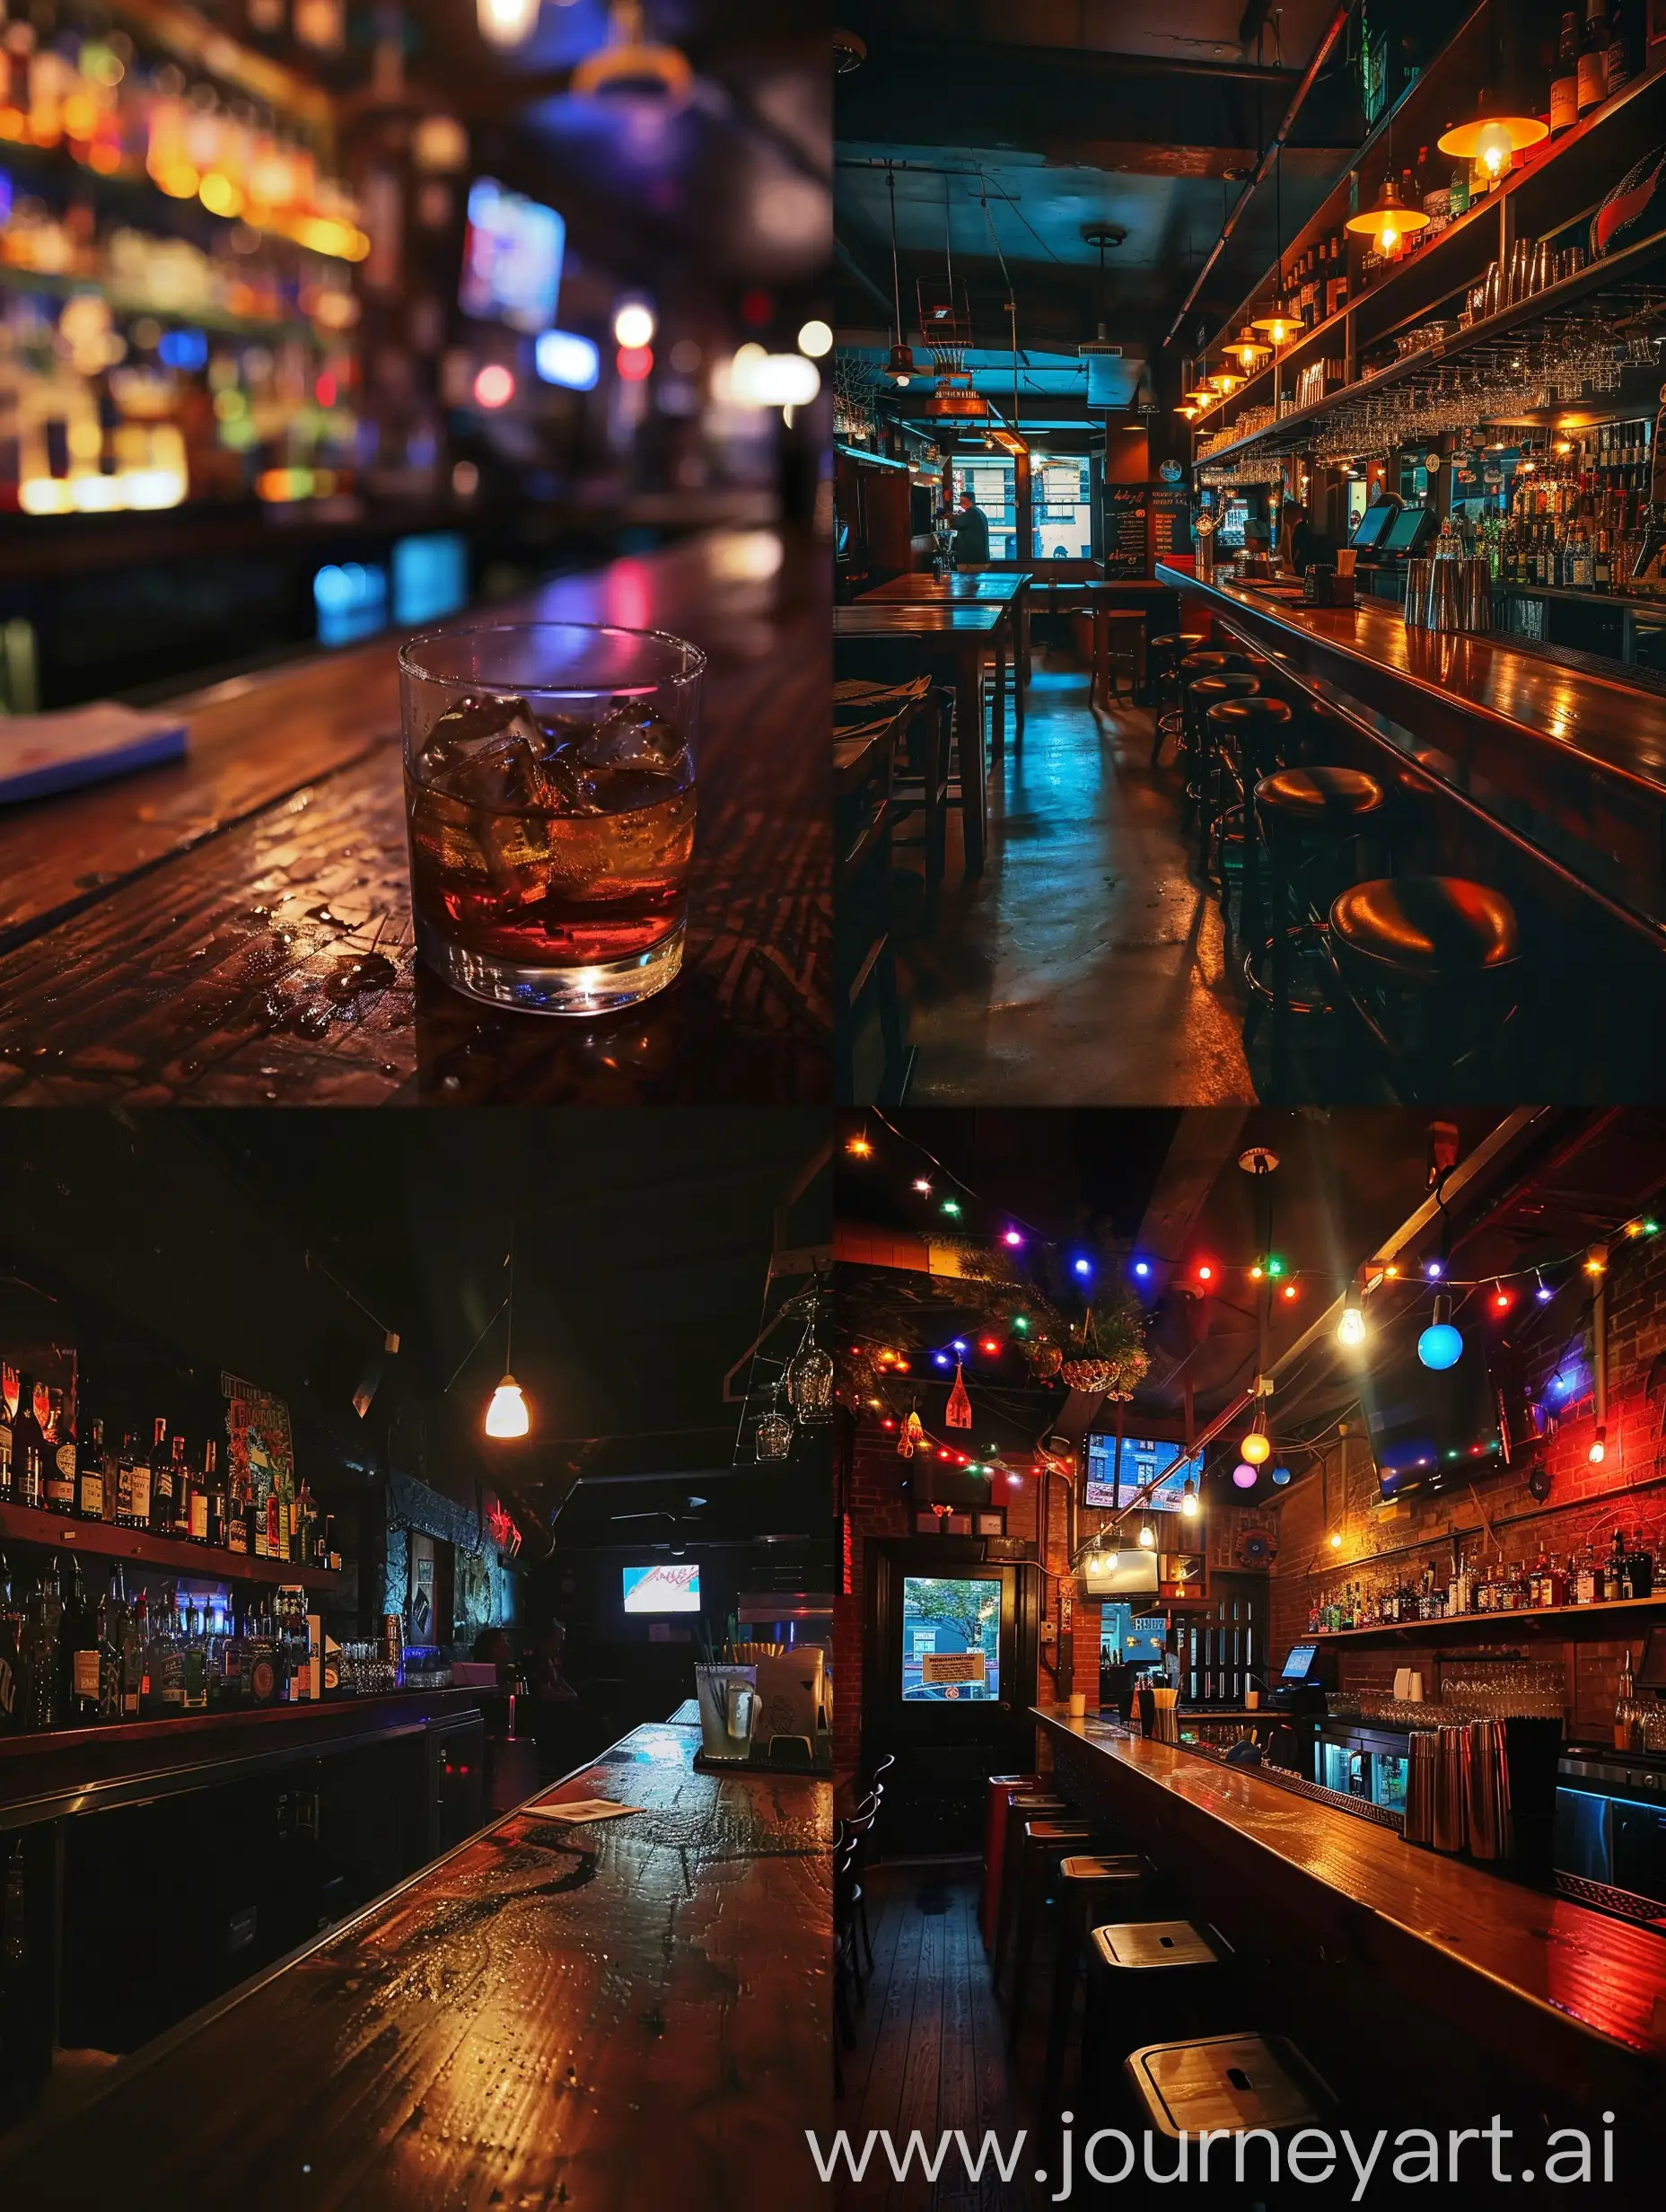 Nightlife-Bar-Scene-with-Vibrant-Atmosphere-and-Lively-Patrons